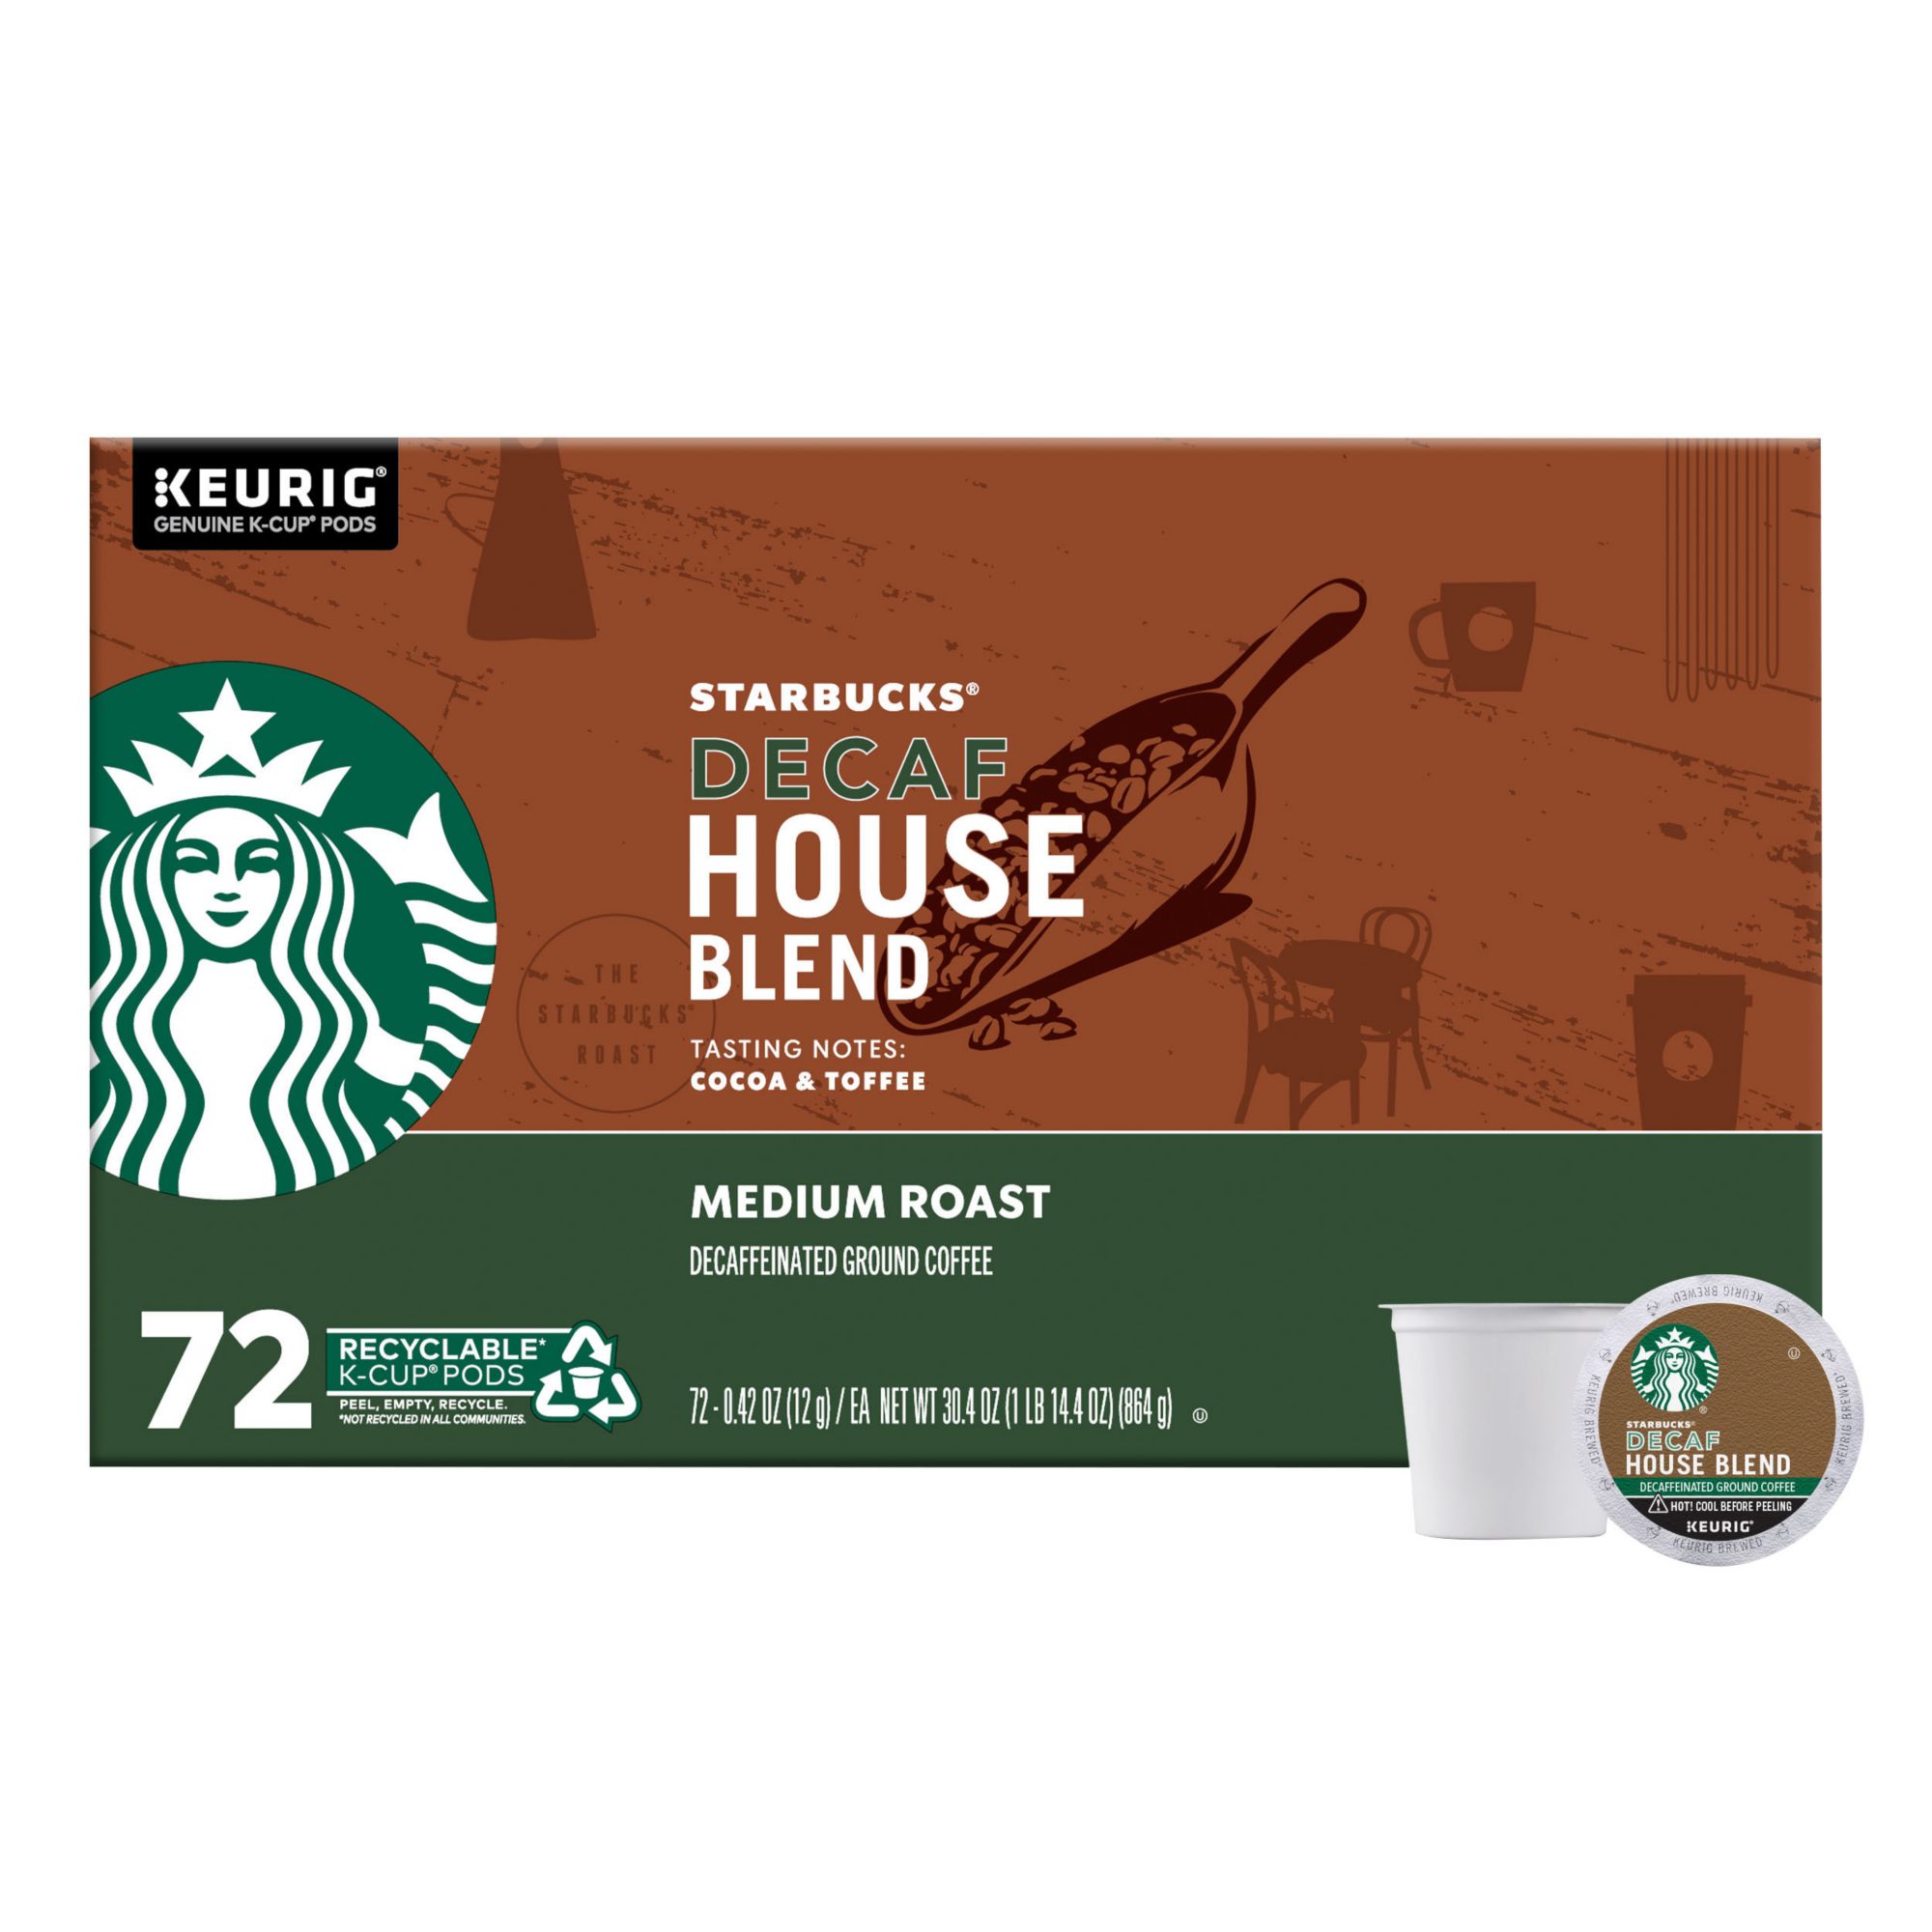 STARBUCKS by Nespresso Pods Variety Pack, 10 Count, 6 Pack –